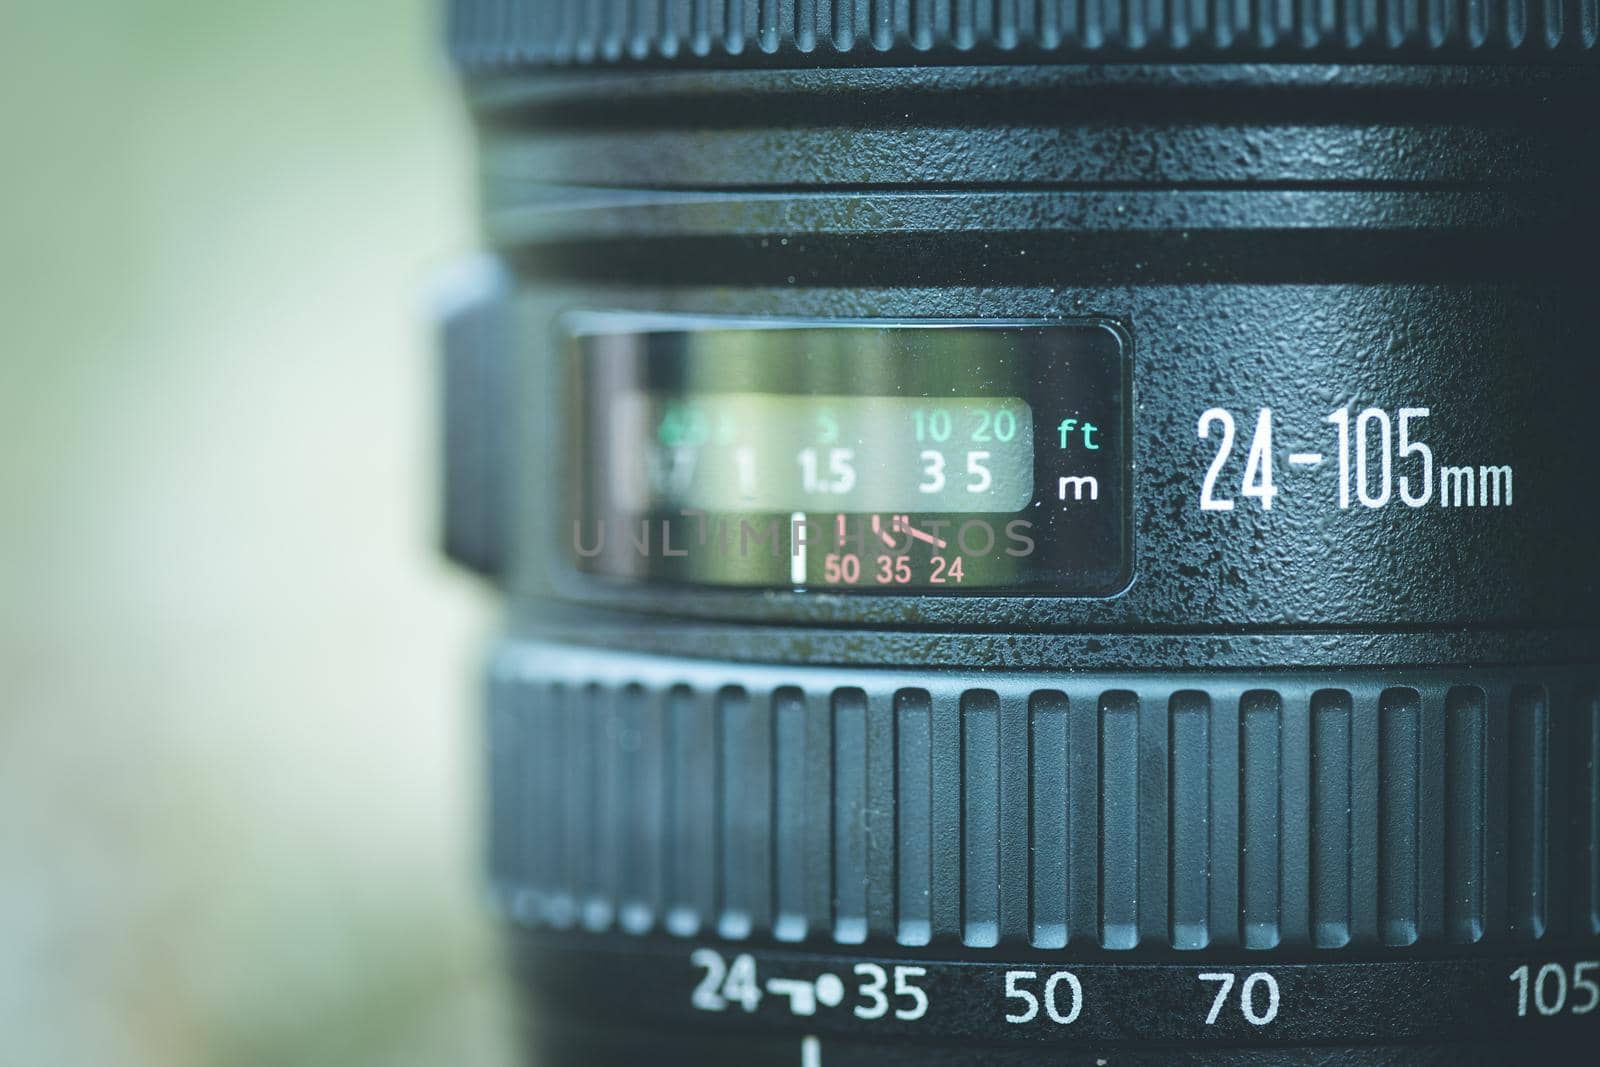 Professional optic photo lens outdoors. Warm colors, blurry background. by Daxenbichler